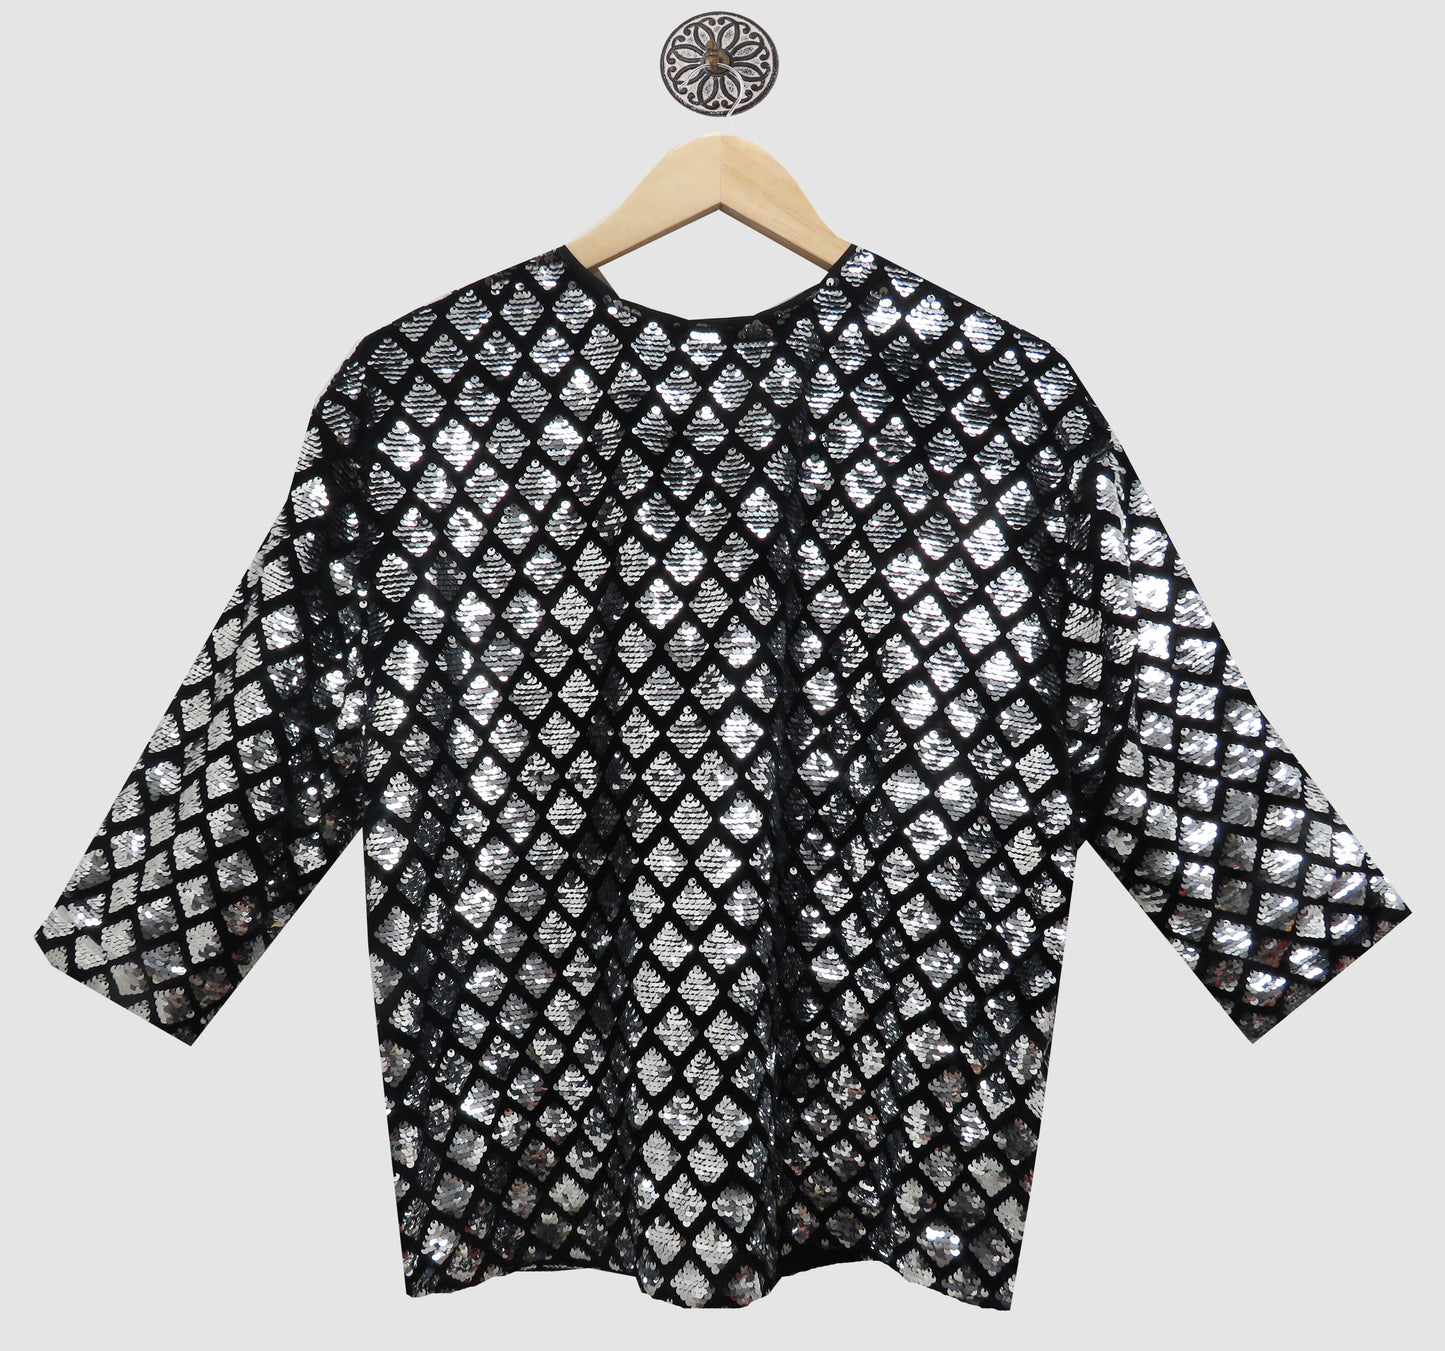 Sequin Party Black Velvet Top With A Round Neckline And 3/4 Length Sleeves